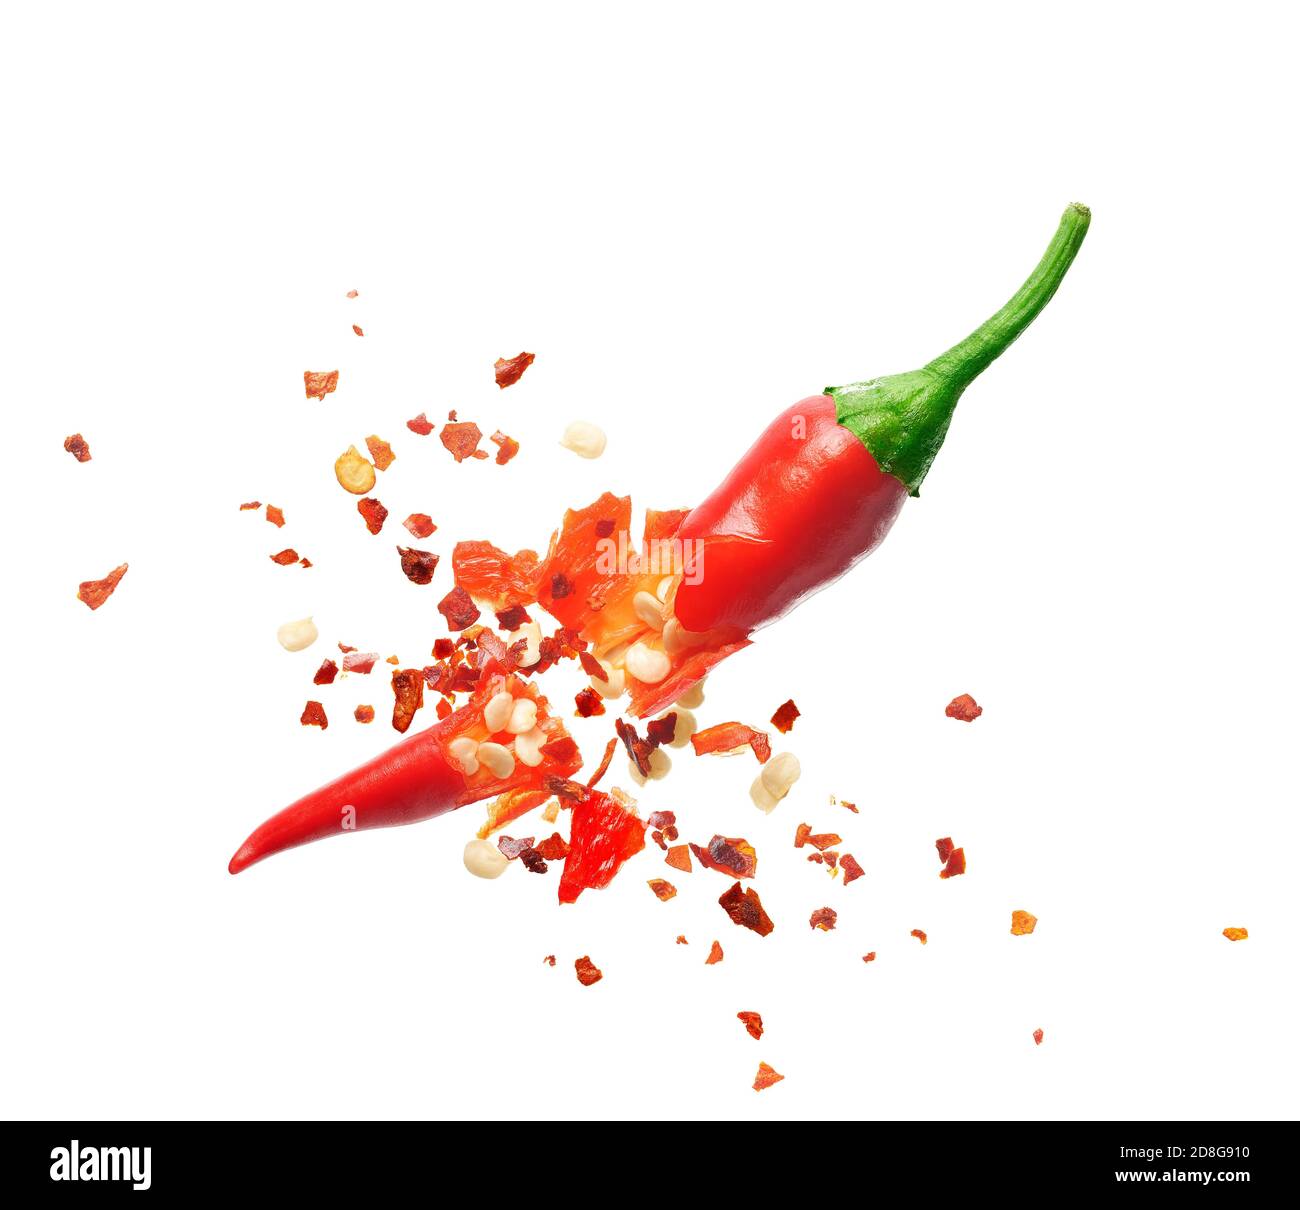 Chili flakes bursting out from red chili pepper over white background Stock Photo